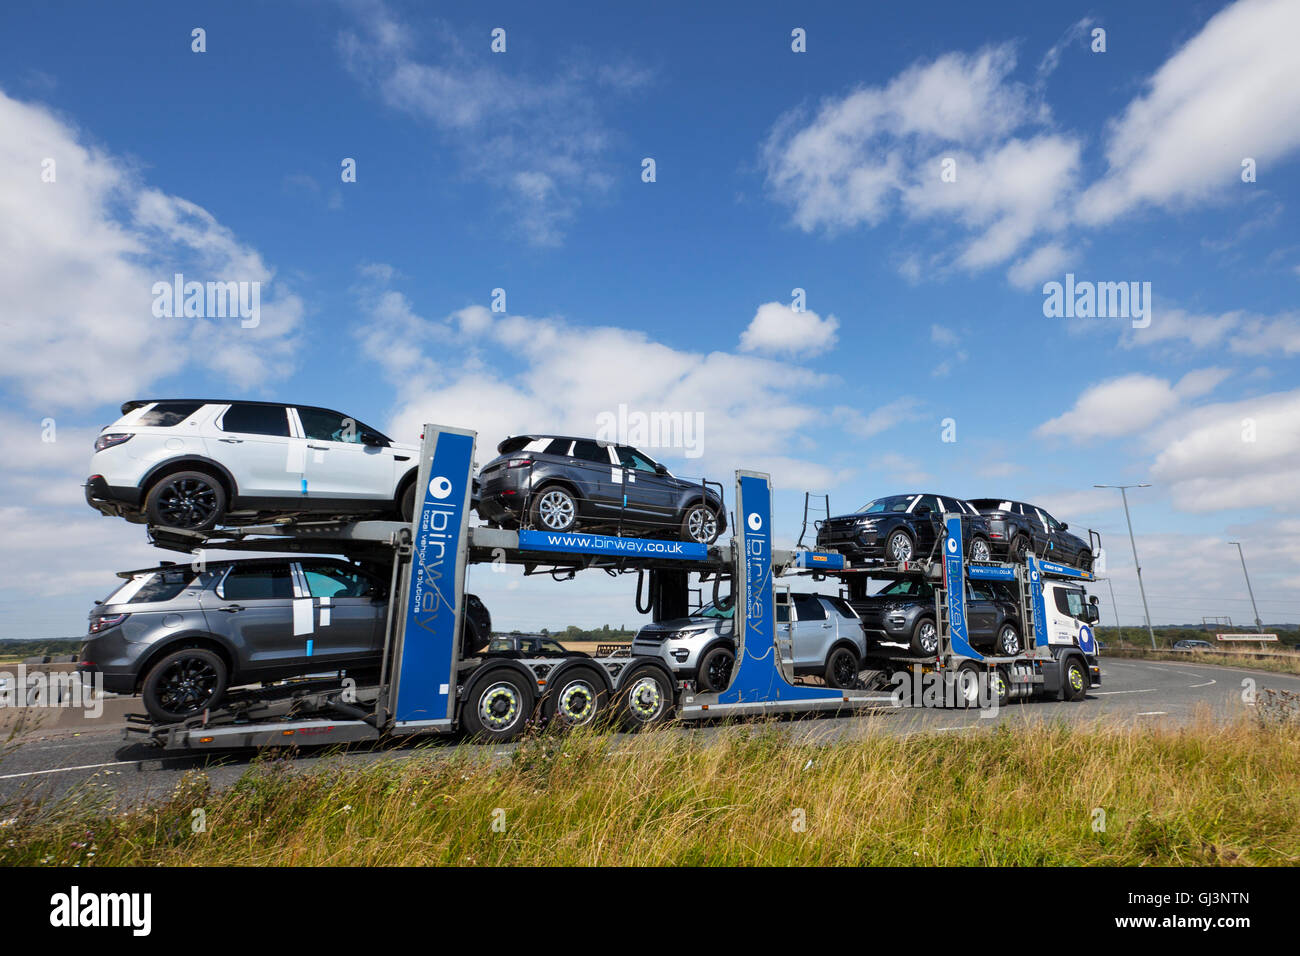 Autotransporter; Car Transporter movers carrying Land Rover's best compact  range rover SUV; Newly built Range Rover Evoque en-route to Liverpool  Docks; Cars for transit to export markets by sea Stock Photo 